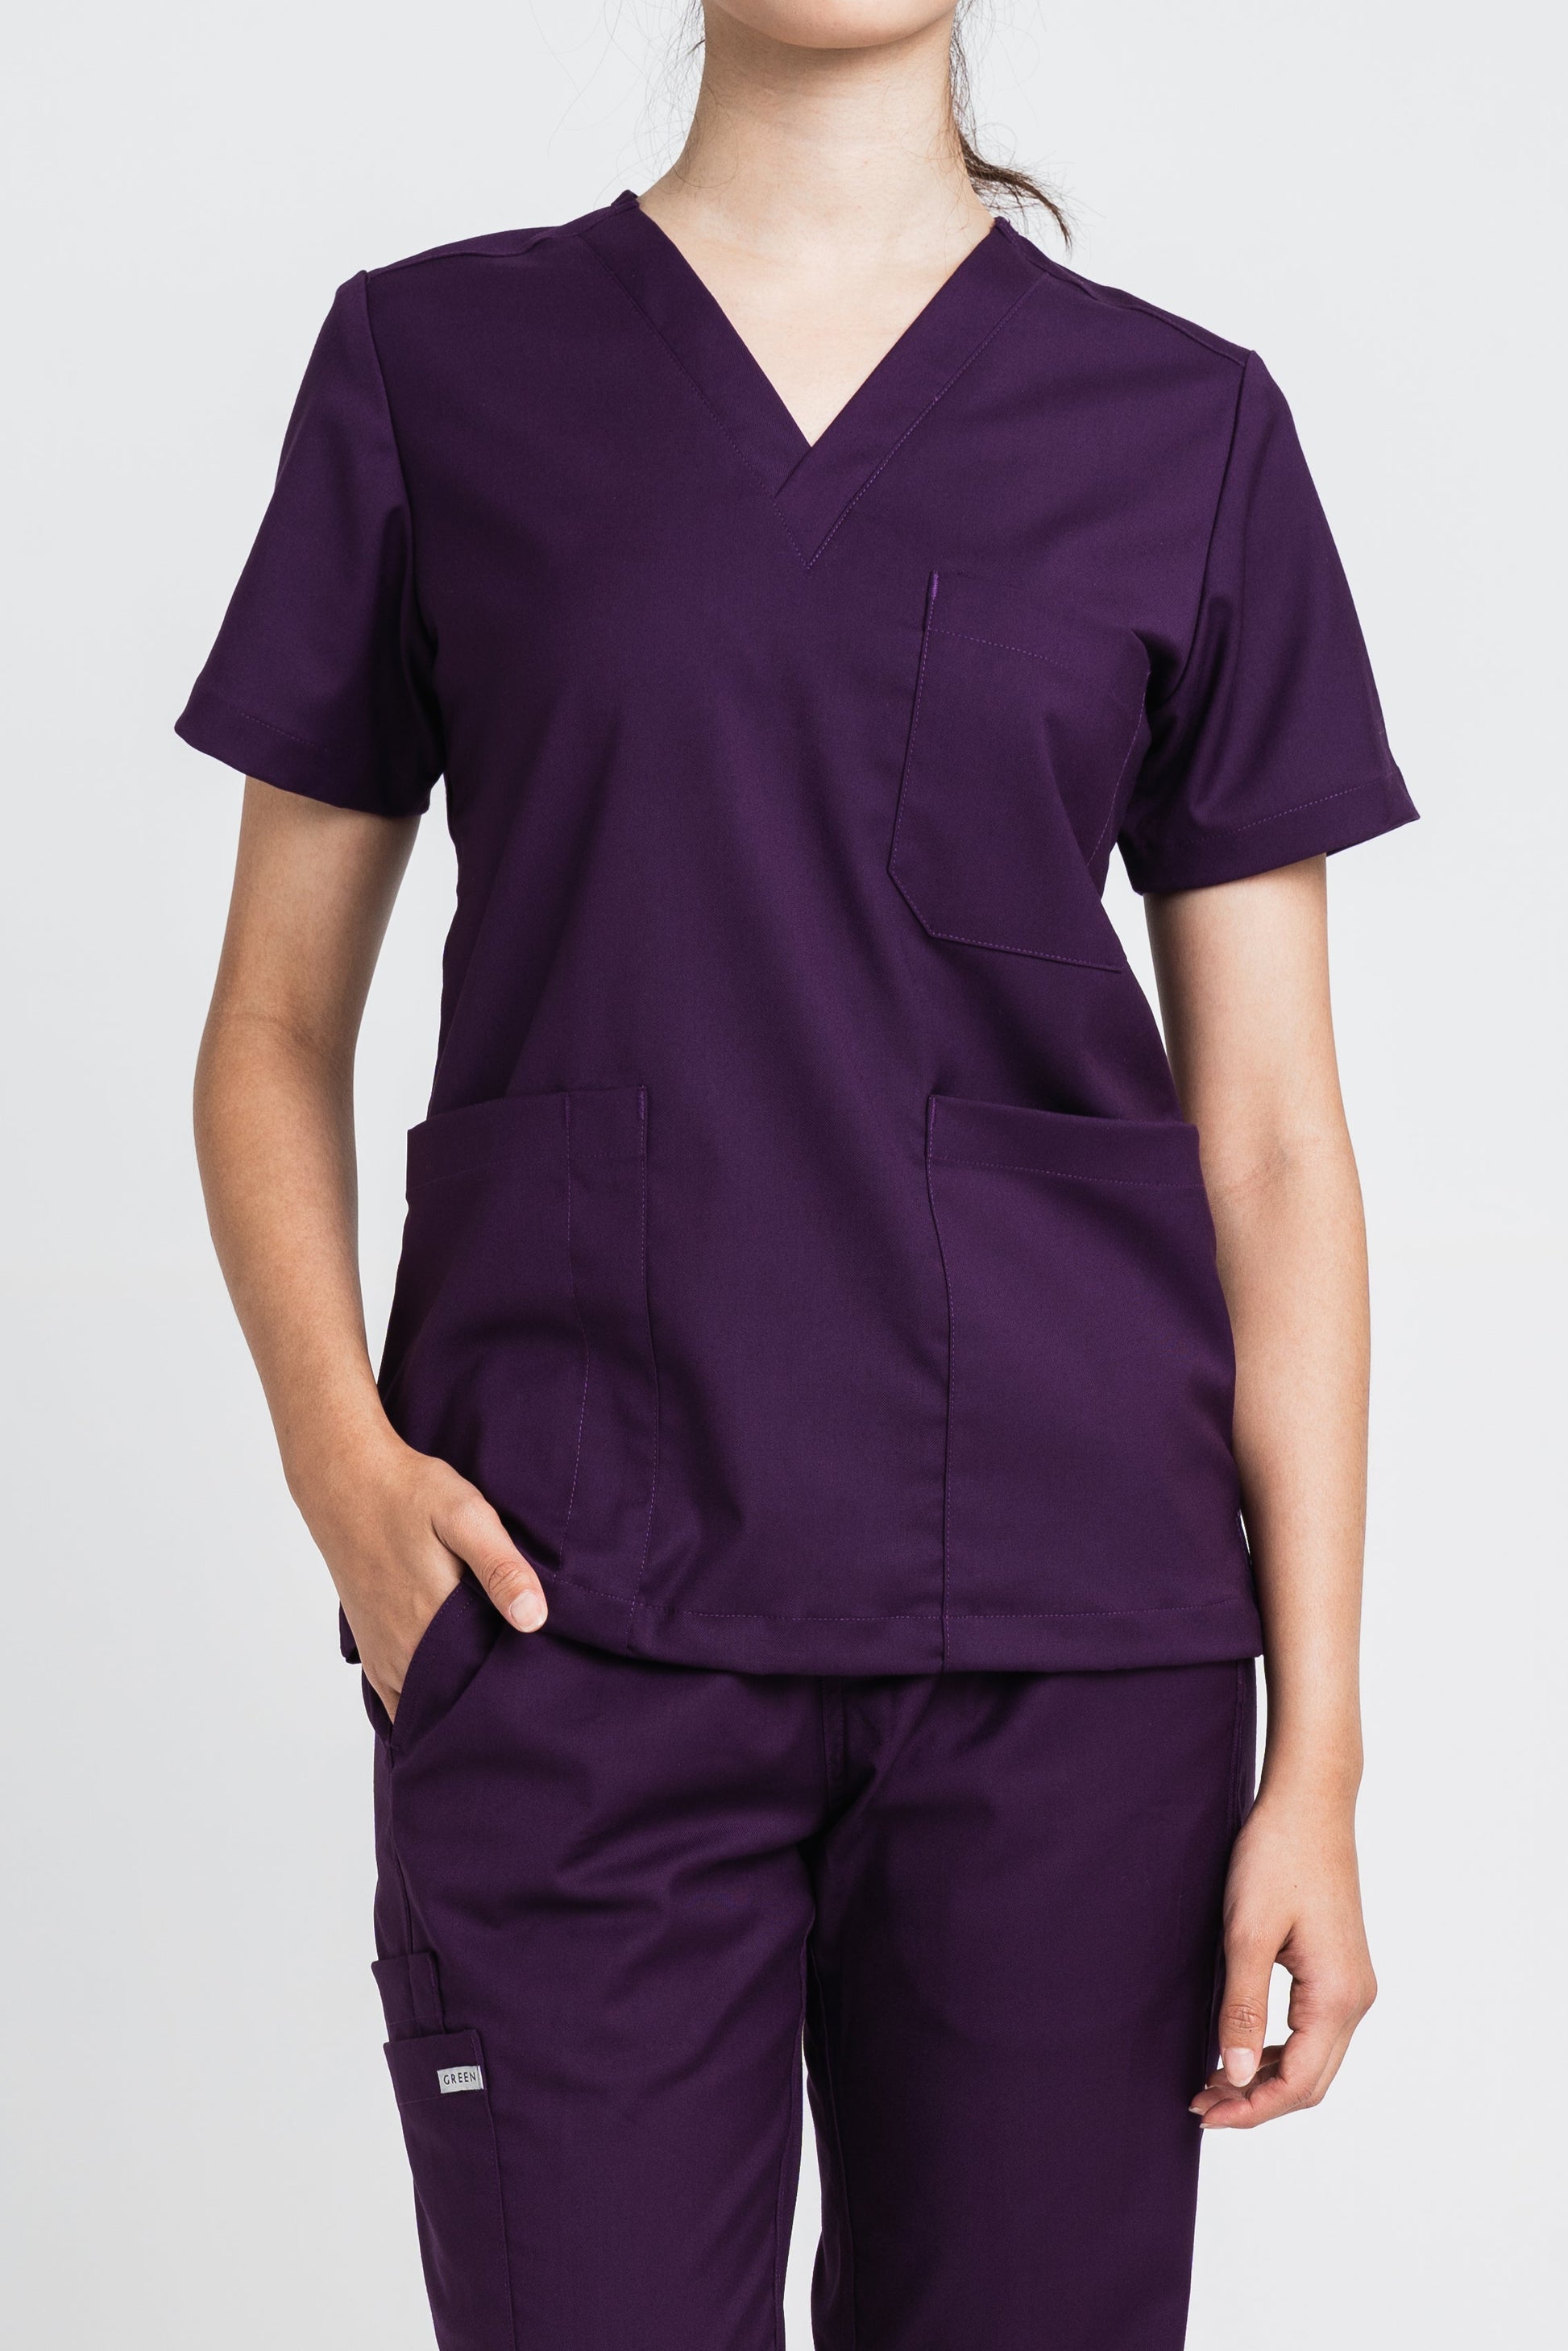 GreenChef by GC Collective – Emma Purple Medical Scrub Top